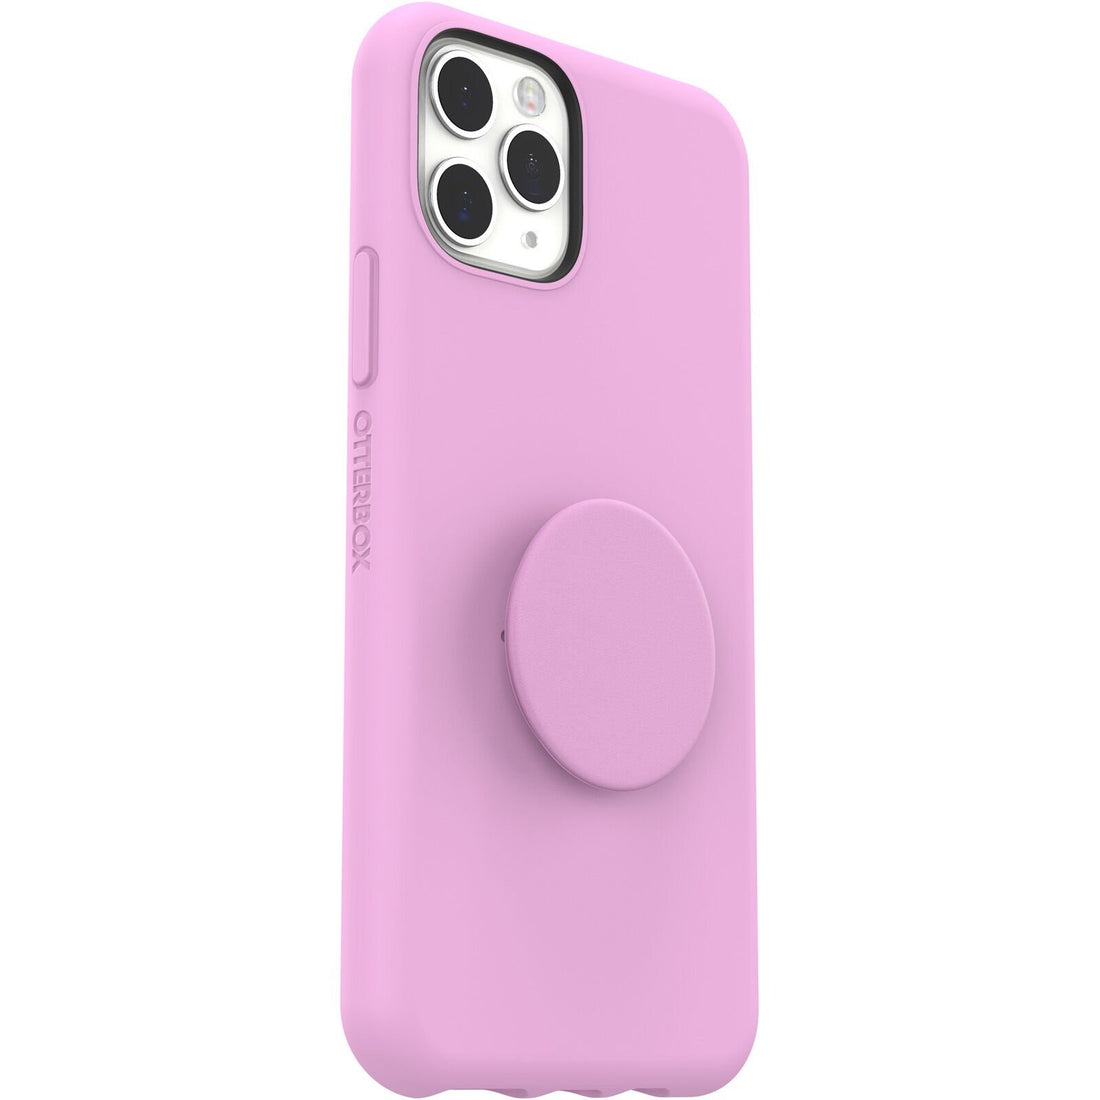 OtterBox + POP Ultra Slim Case for Apple iPhone 11 Pro Max - Lavender Sour (Certified Refurbished)